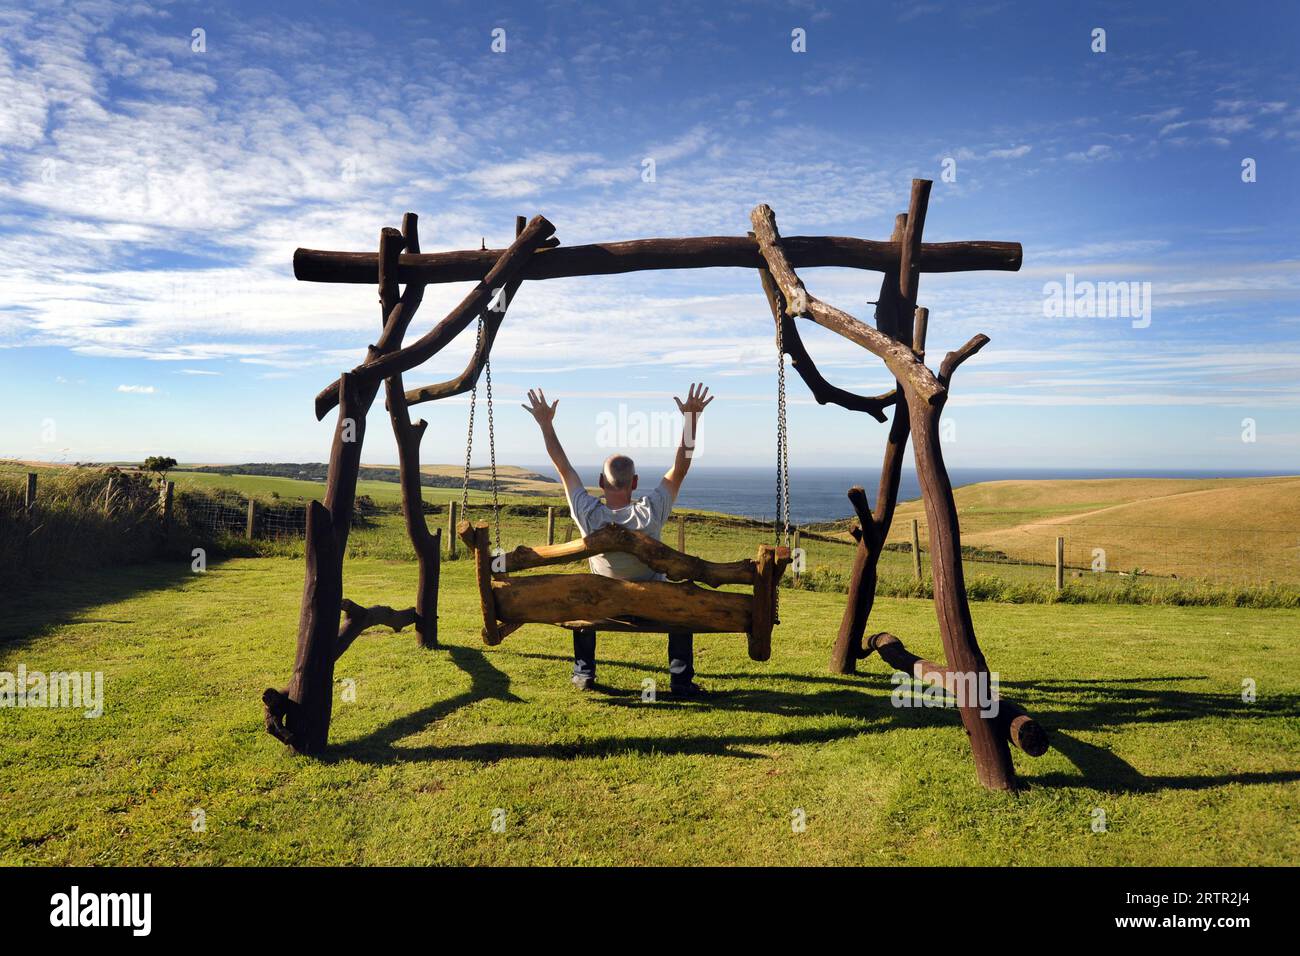 MAN ON GARDEN SWING BENCH WITH SEA VIEW RE RETIREMENT MENTAL HEALTH COUNTRYSIDE RETIRING ETC UK Stock Photo